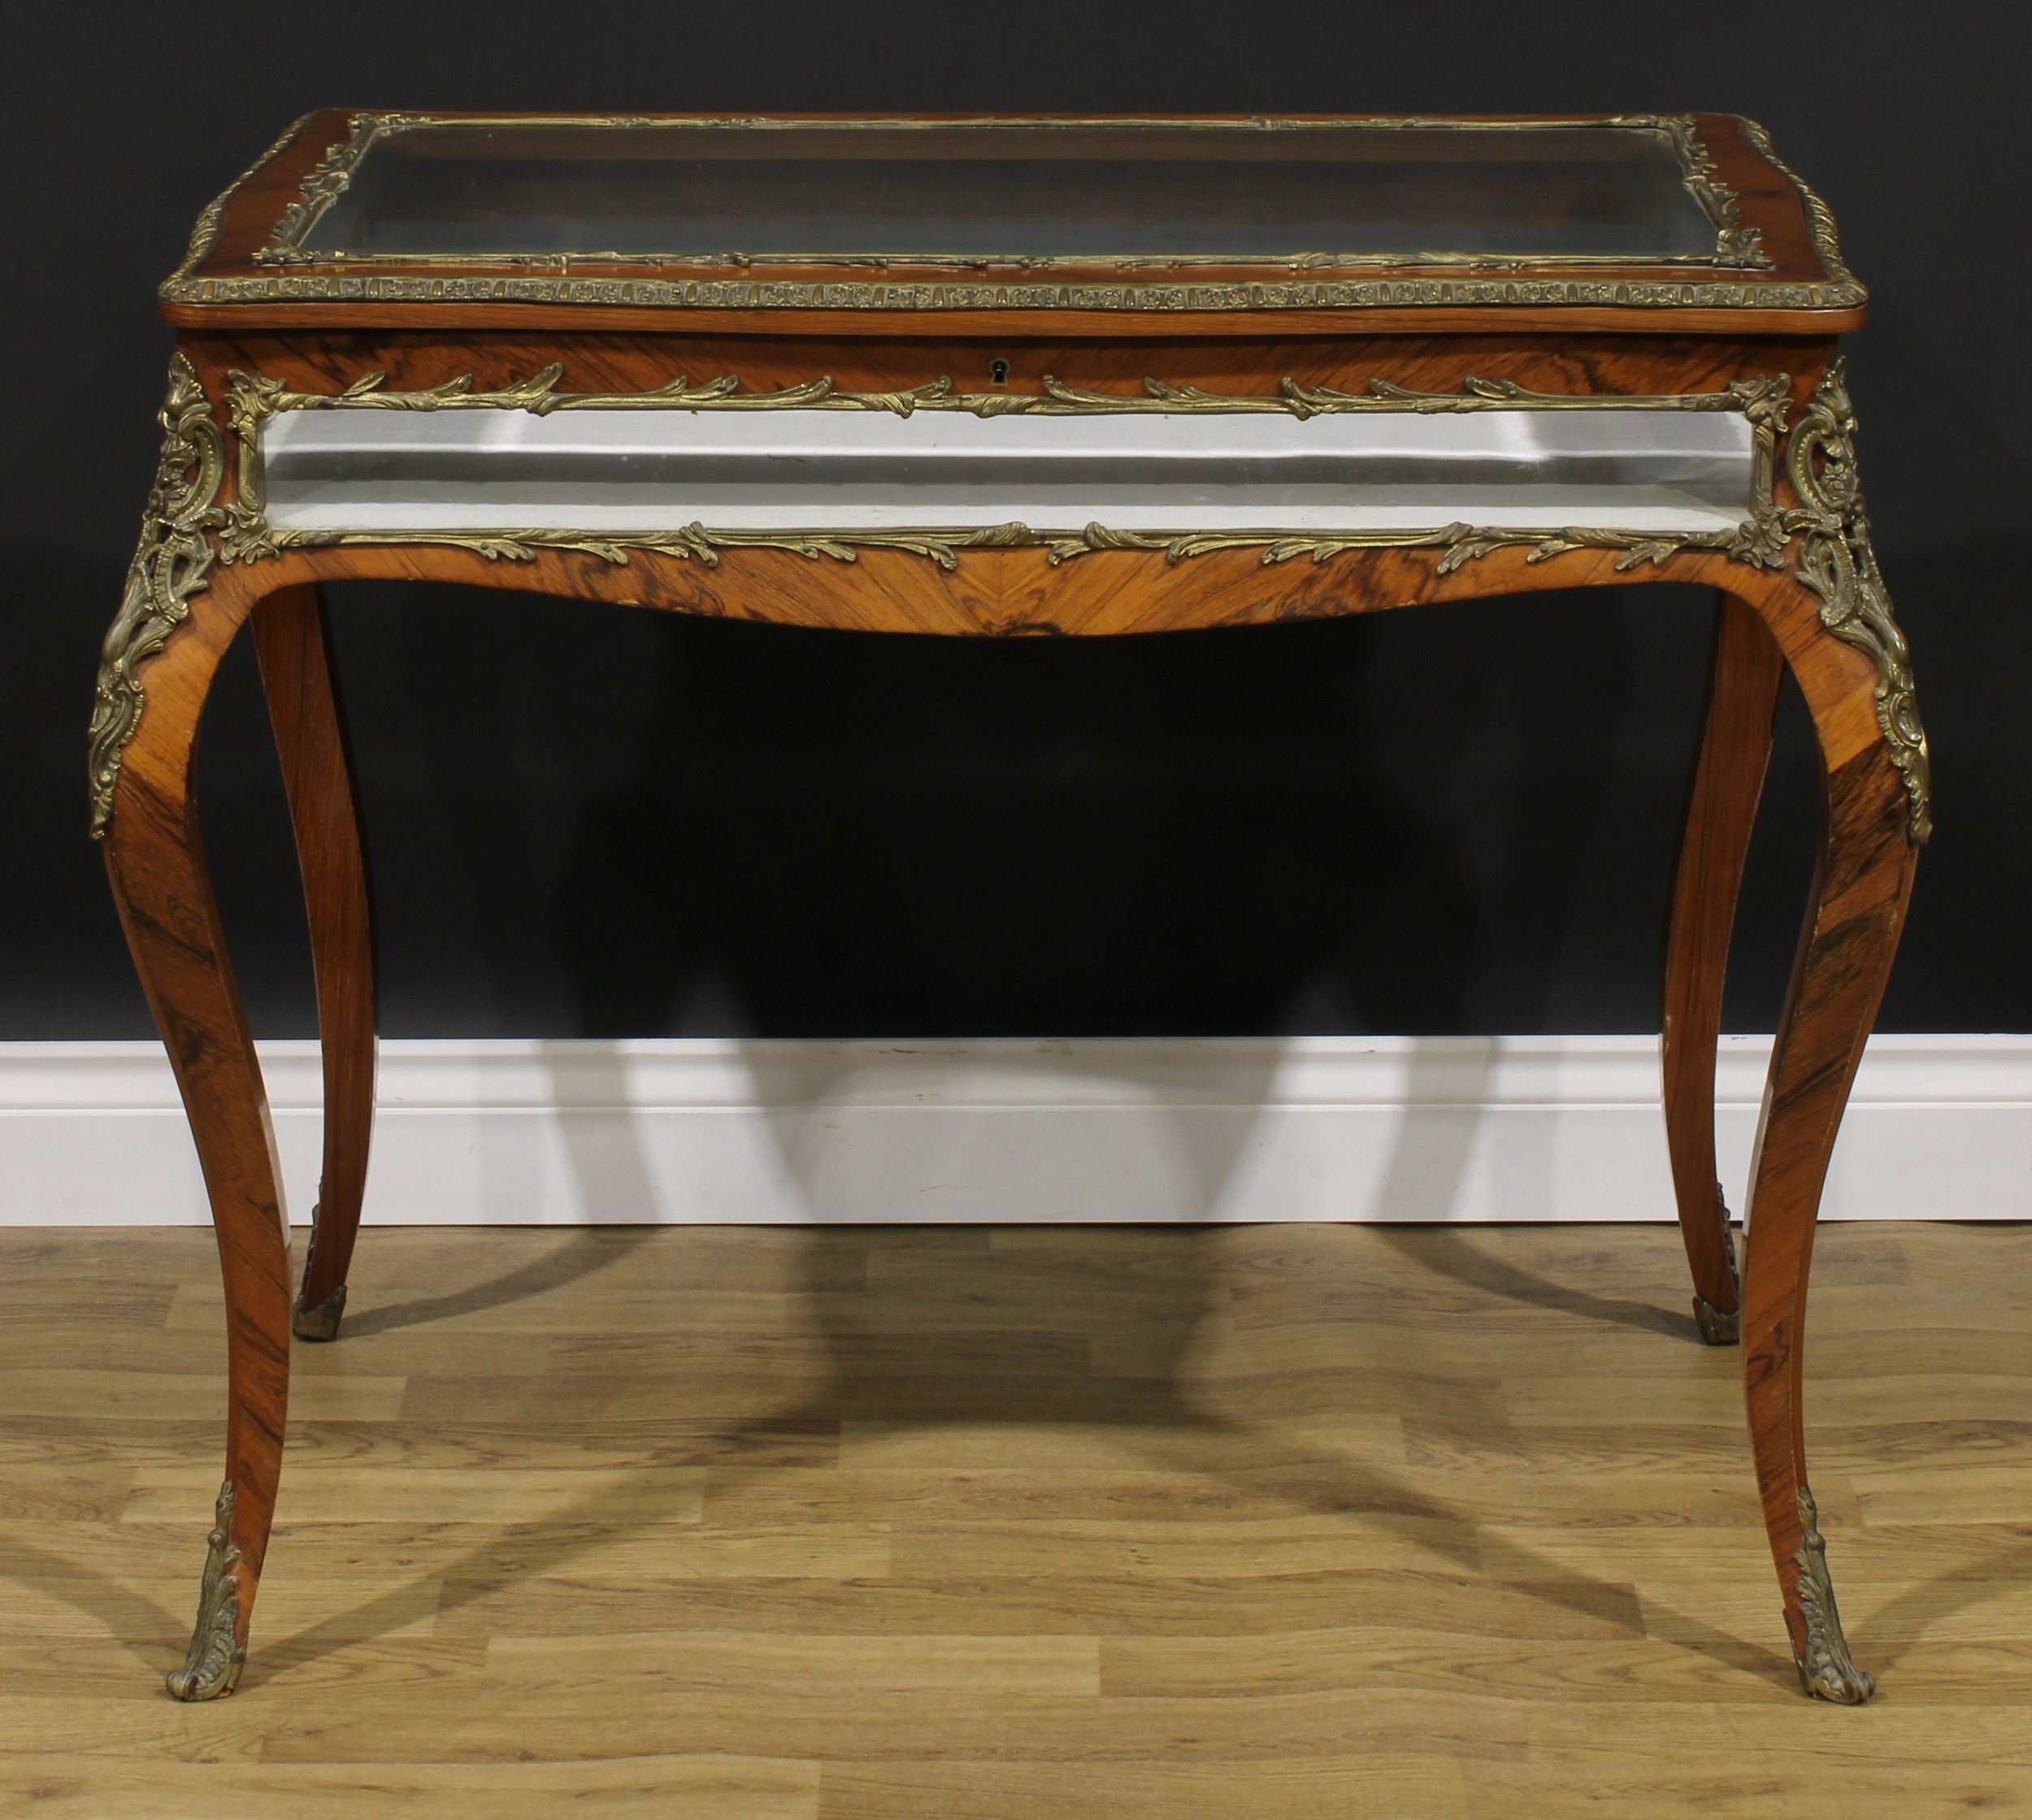 A Louis XV Revival gilt metal mounted rosewood bijouterie table, hinged top, French cabriole legs,